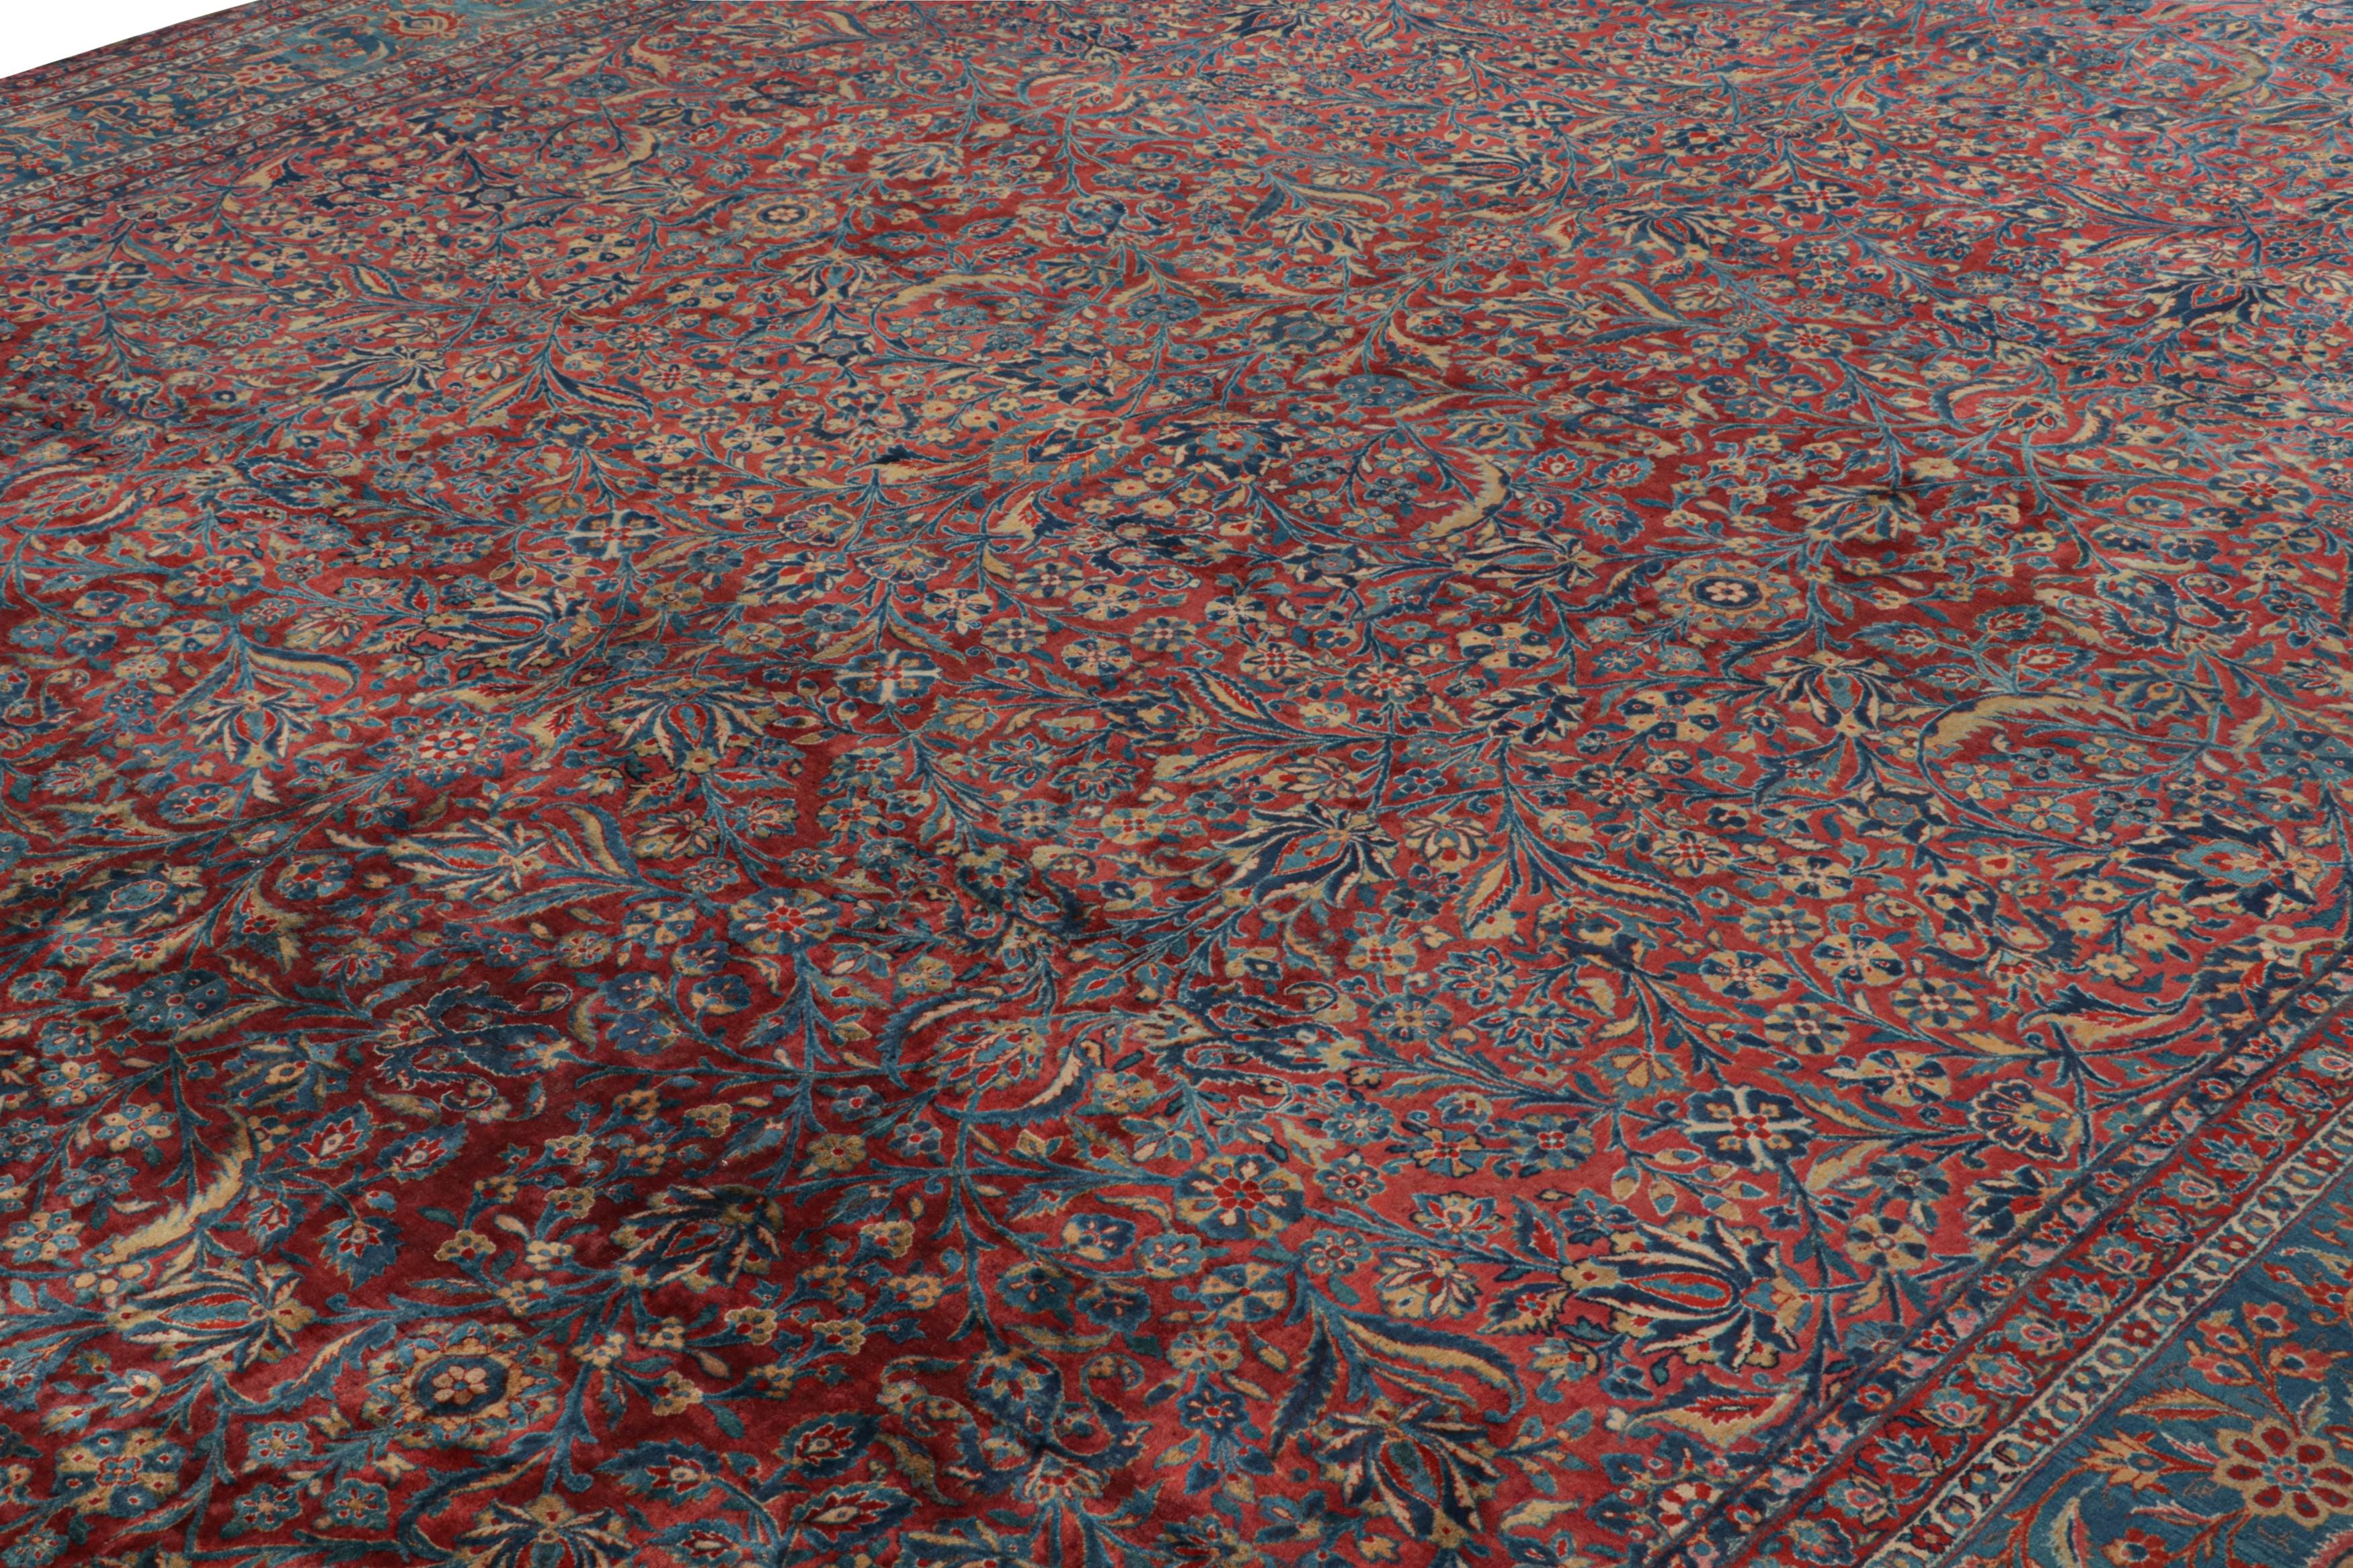 Antique Persian Kashan Rug with Red-Blue Floral Patterns by Rug & Kilim In Good Condition For Sale In Long Island City, NY